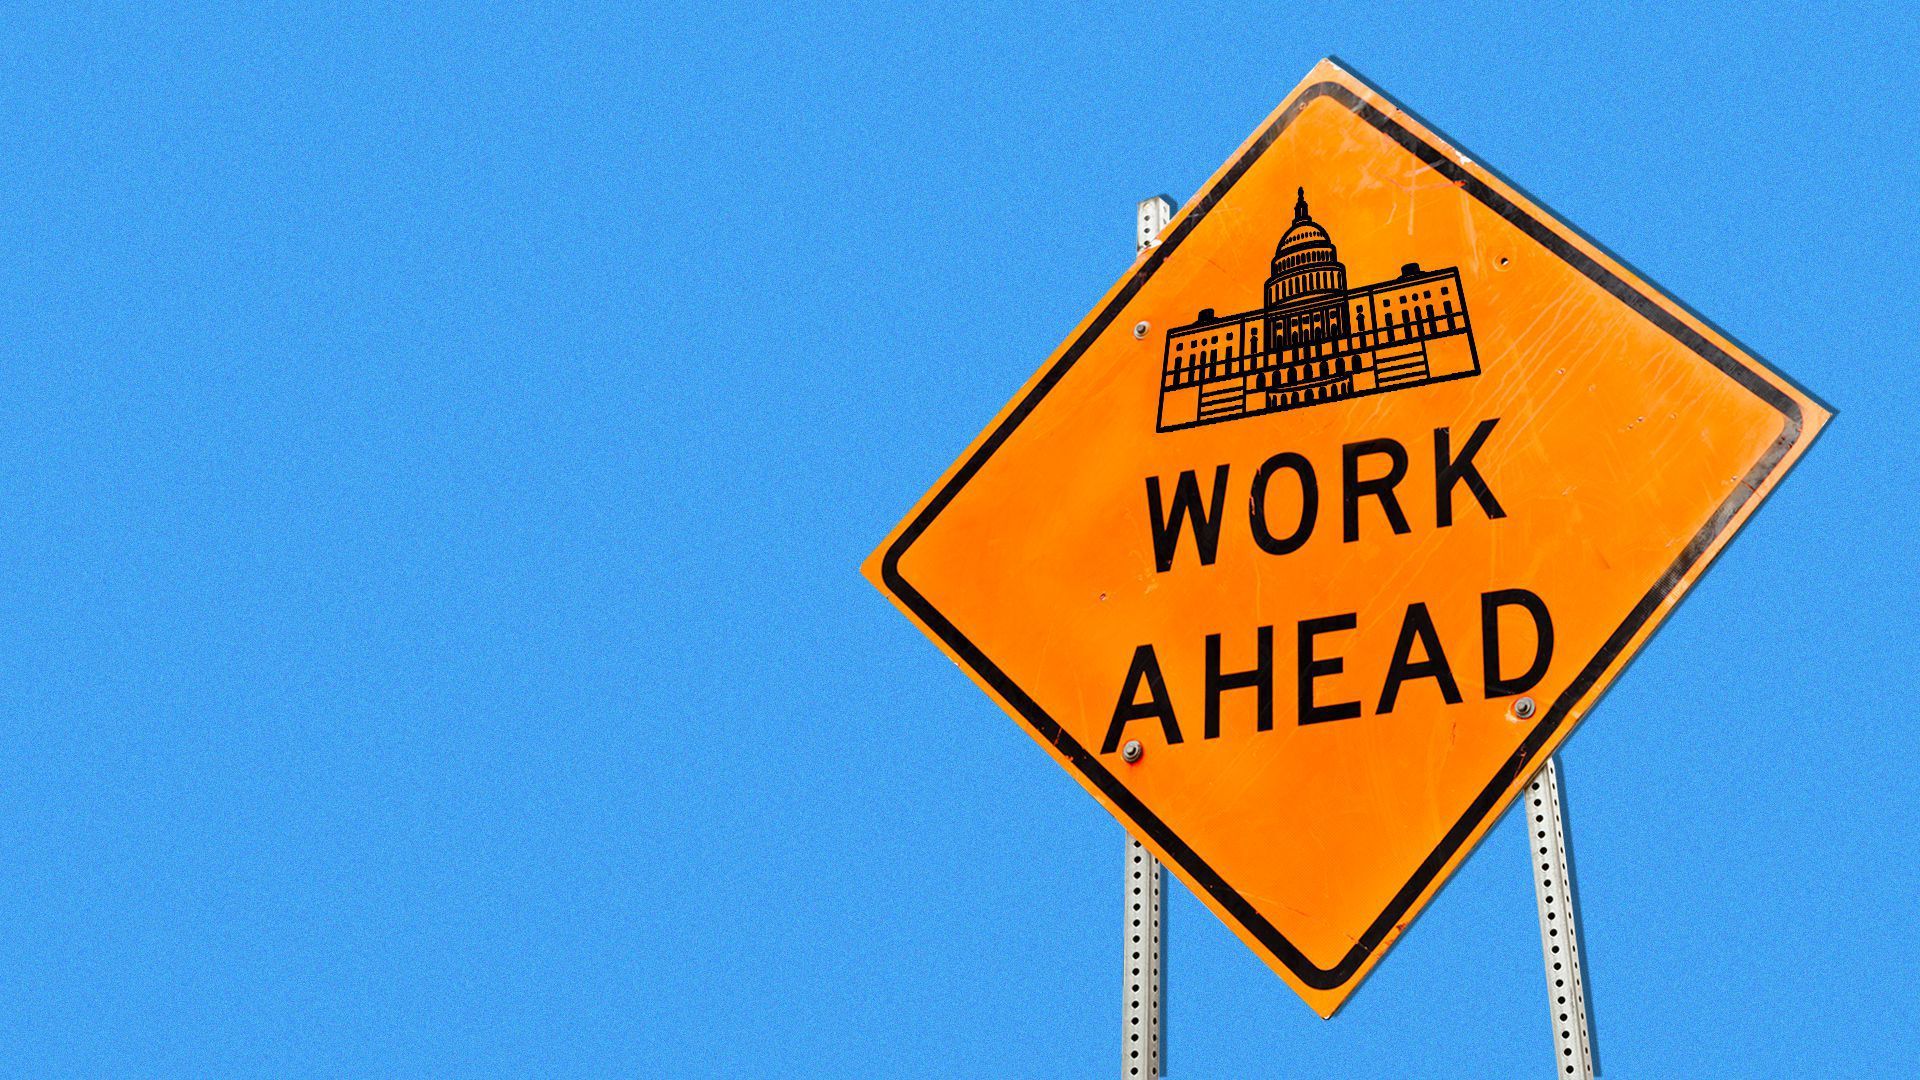 An illustration shows a "Work Ahead" sign with an image of the Capitol Dome.